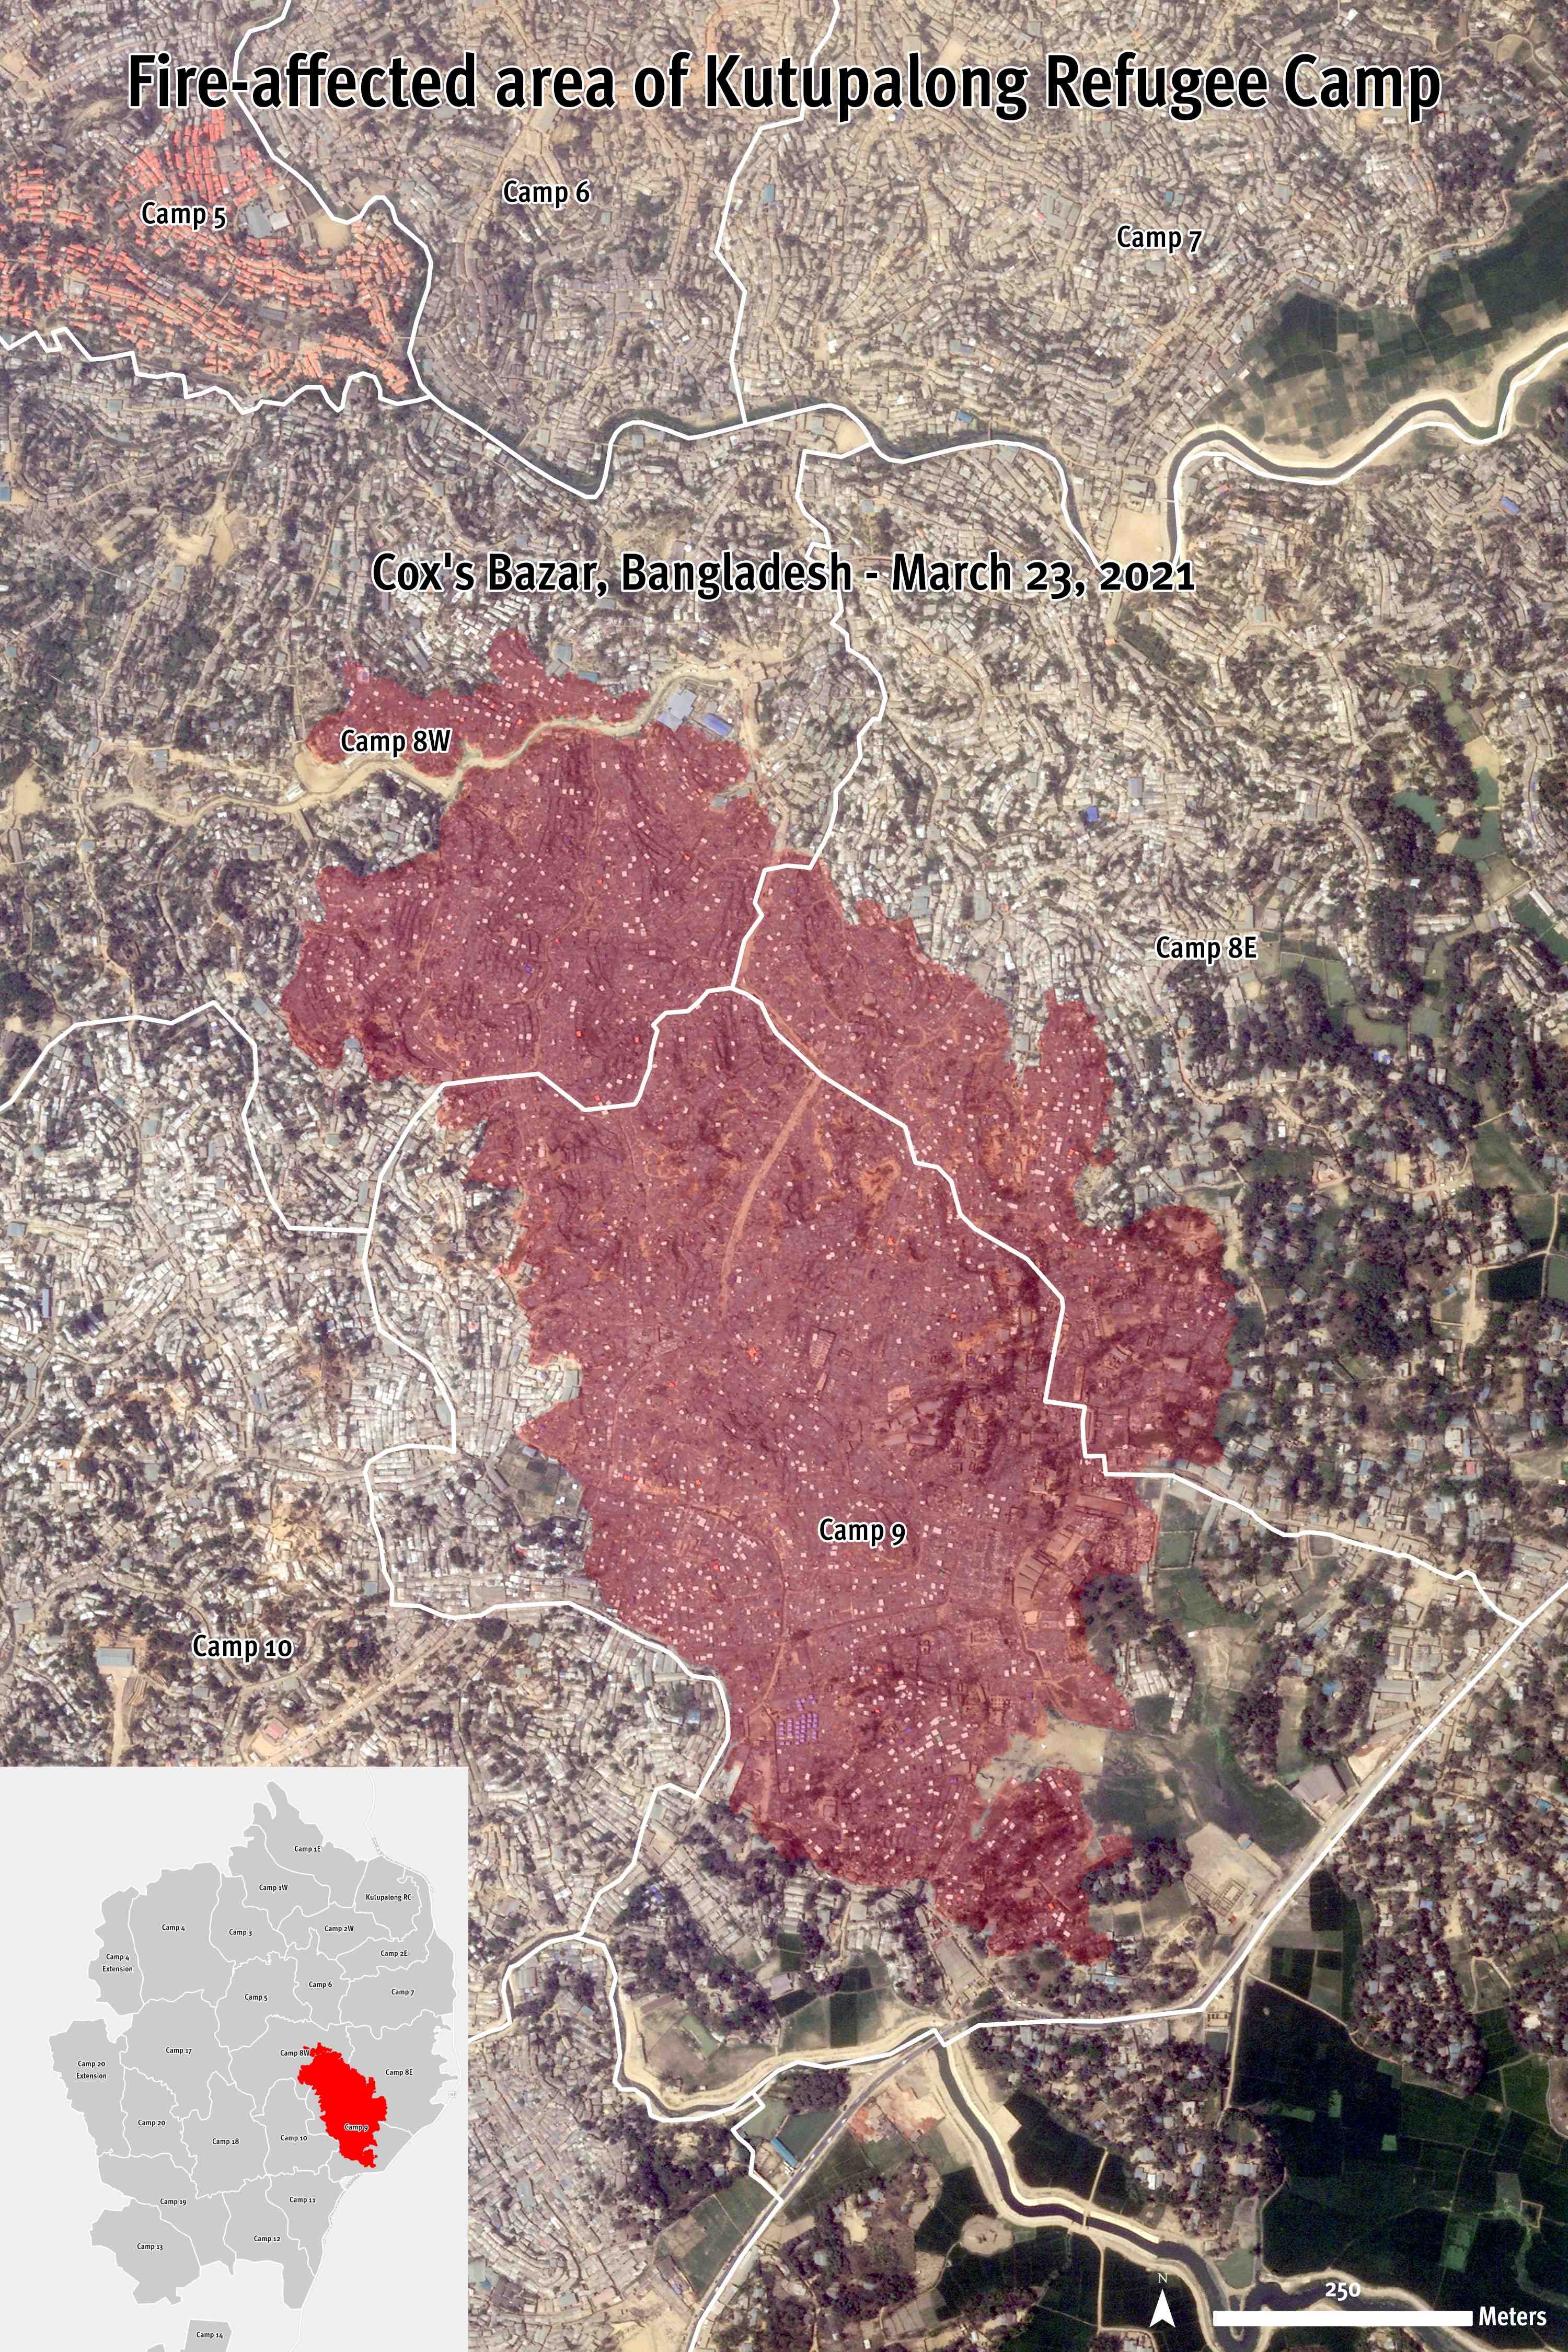 Human Rights Watch analyzed satellite imagery collected after the fire in Kutupalong Refugee Camp on March 22, 2021. Imagery recorded the next day shows a fire-affected area of approximately 61 hectares. The majority of the destruction is concentrated in Camp 9, Camp 8E, and Camp 8W, including the estimated destruction of at least 10,000 shelters.